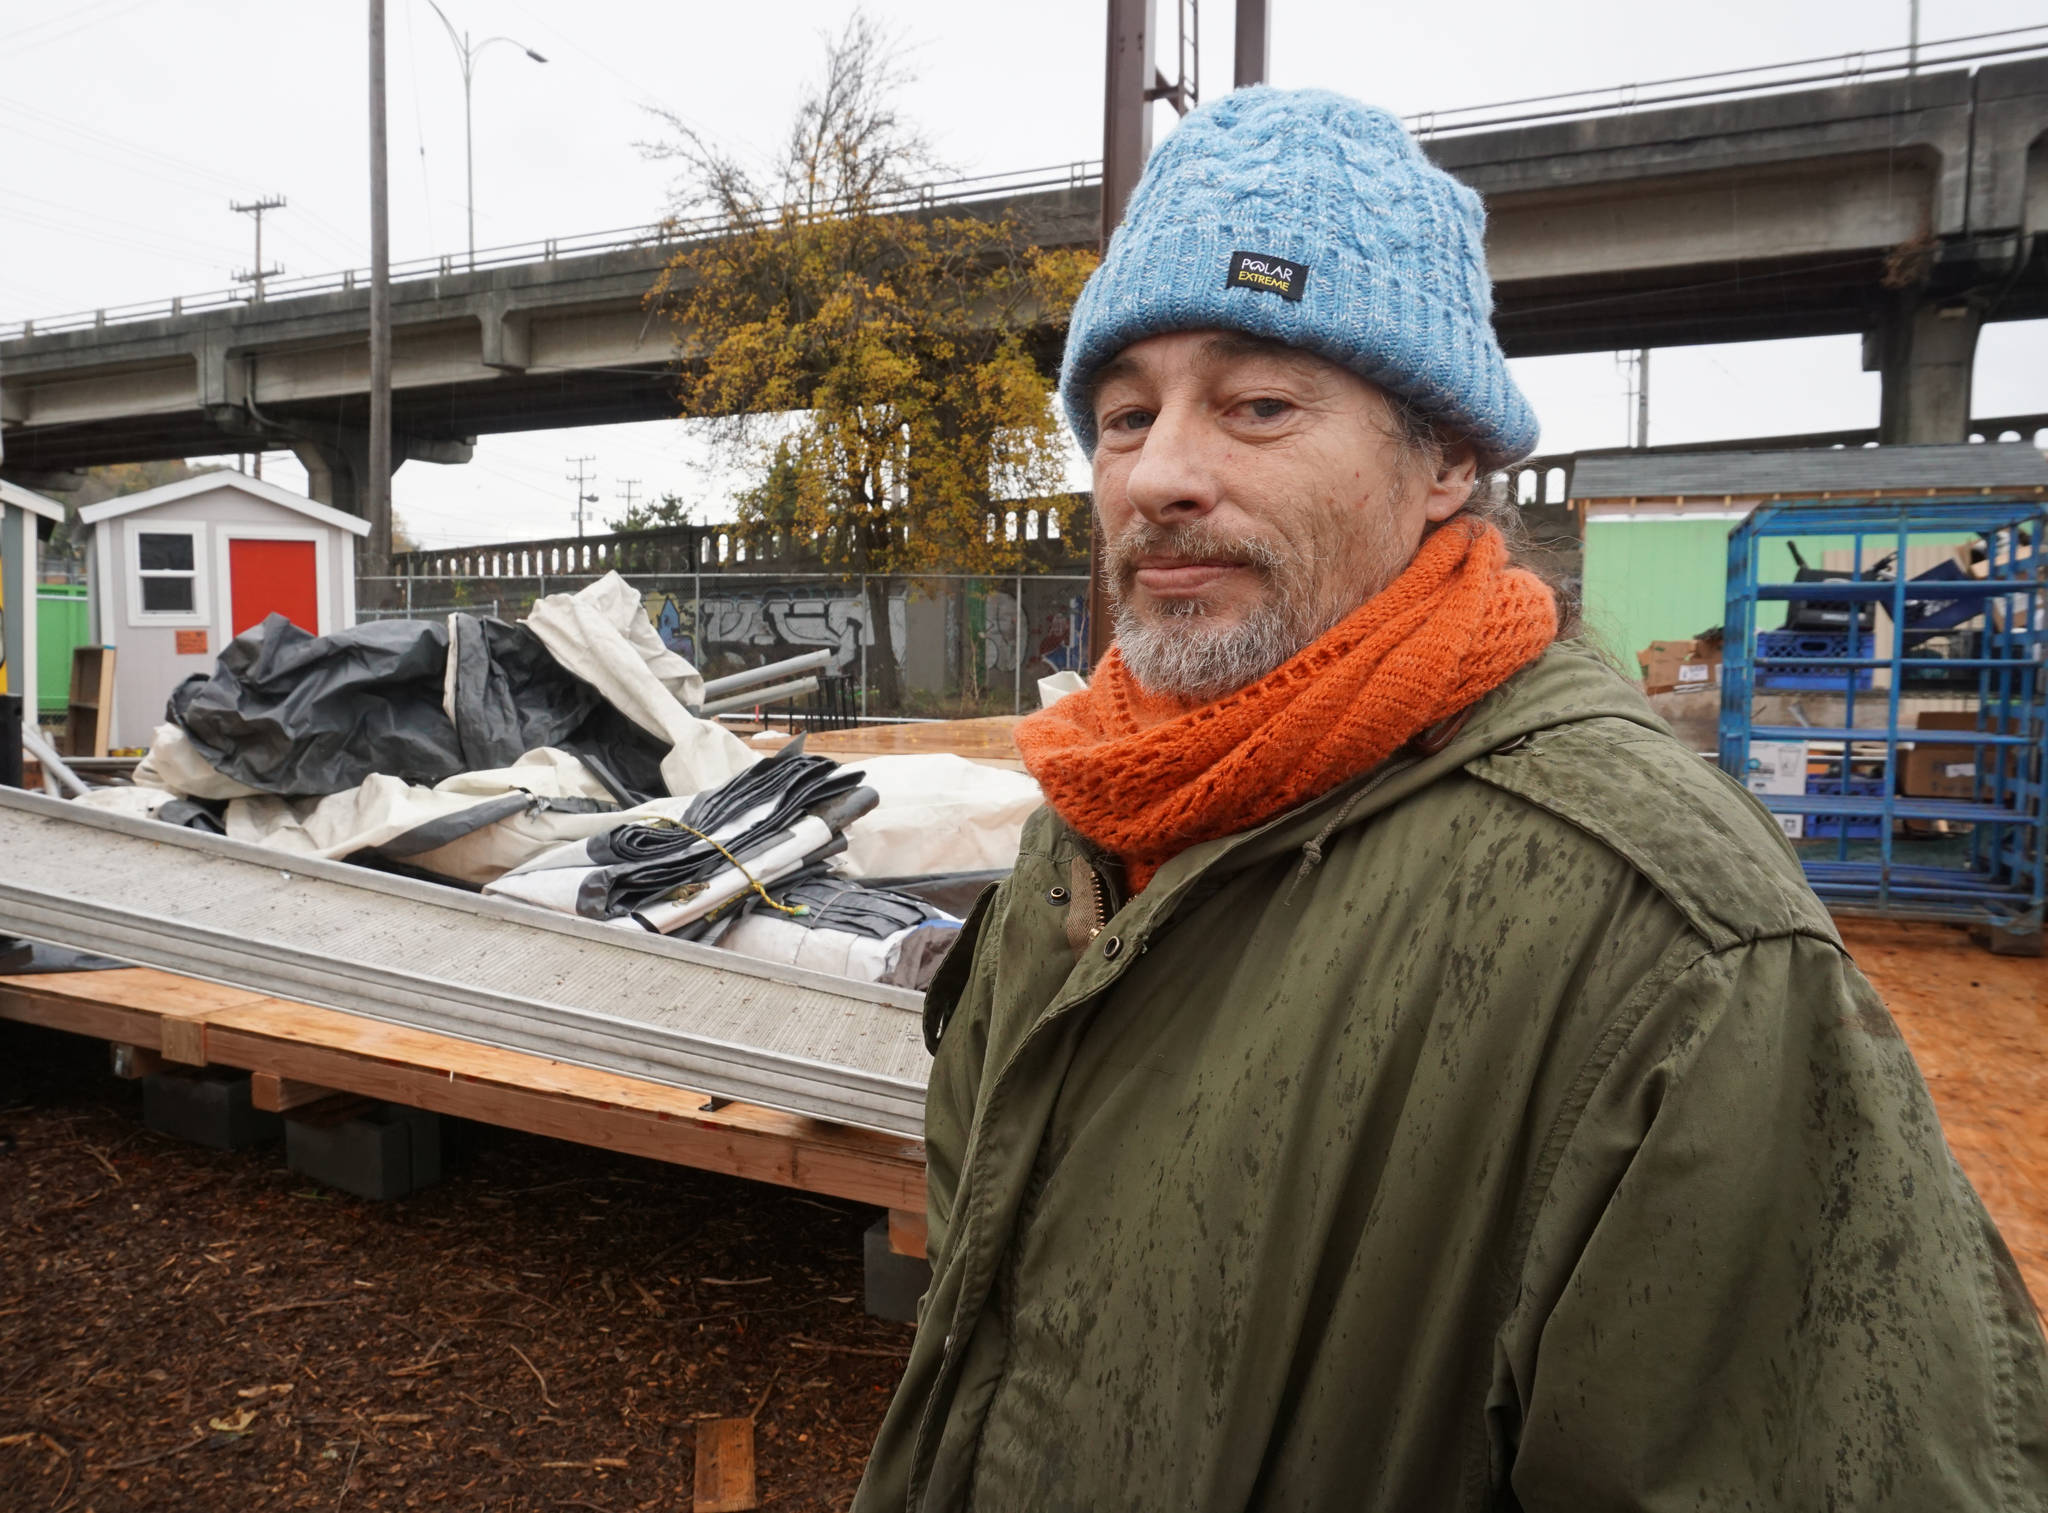 Tent City 5 Campers Move to Interbay Tiny House Village